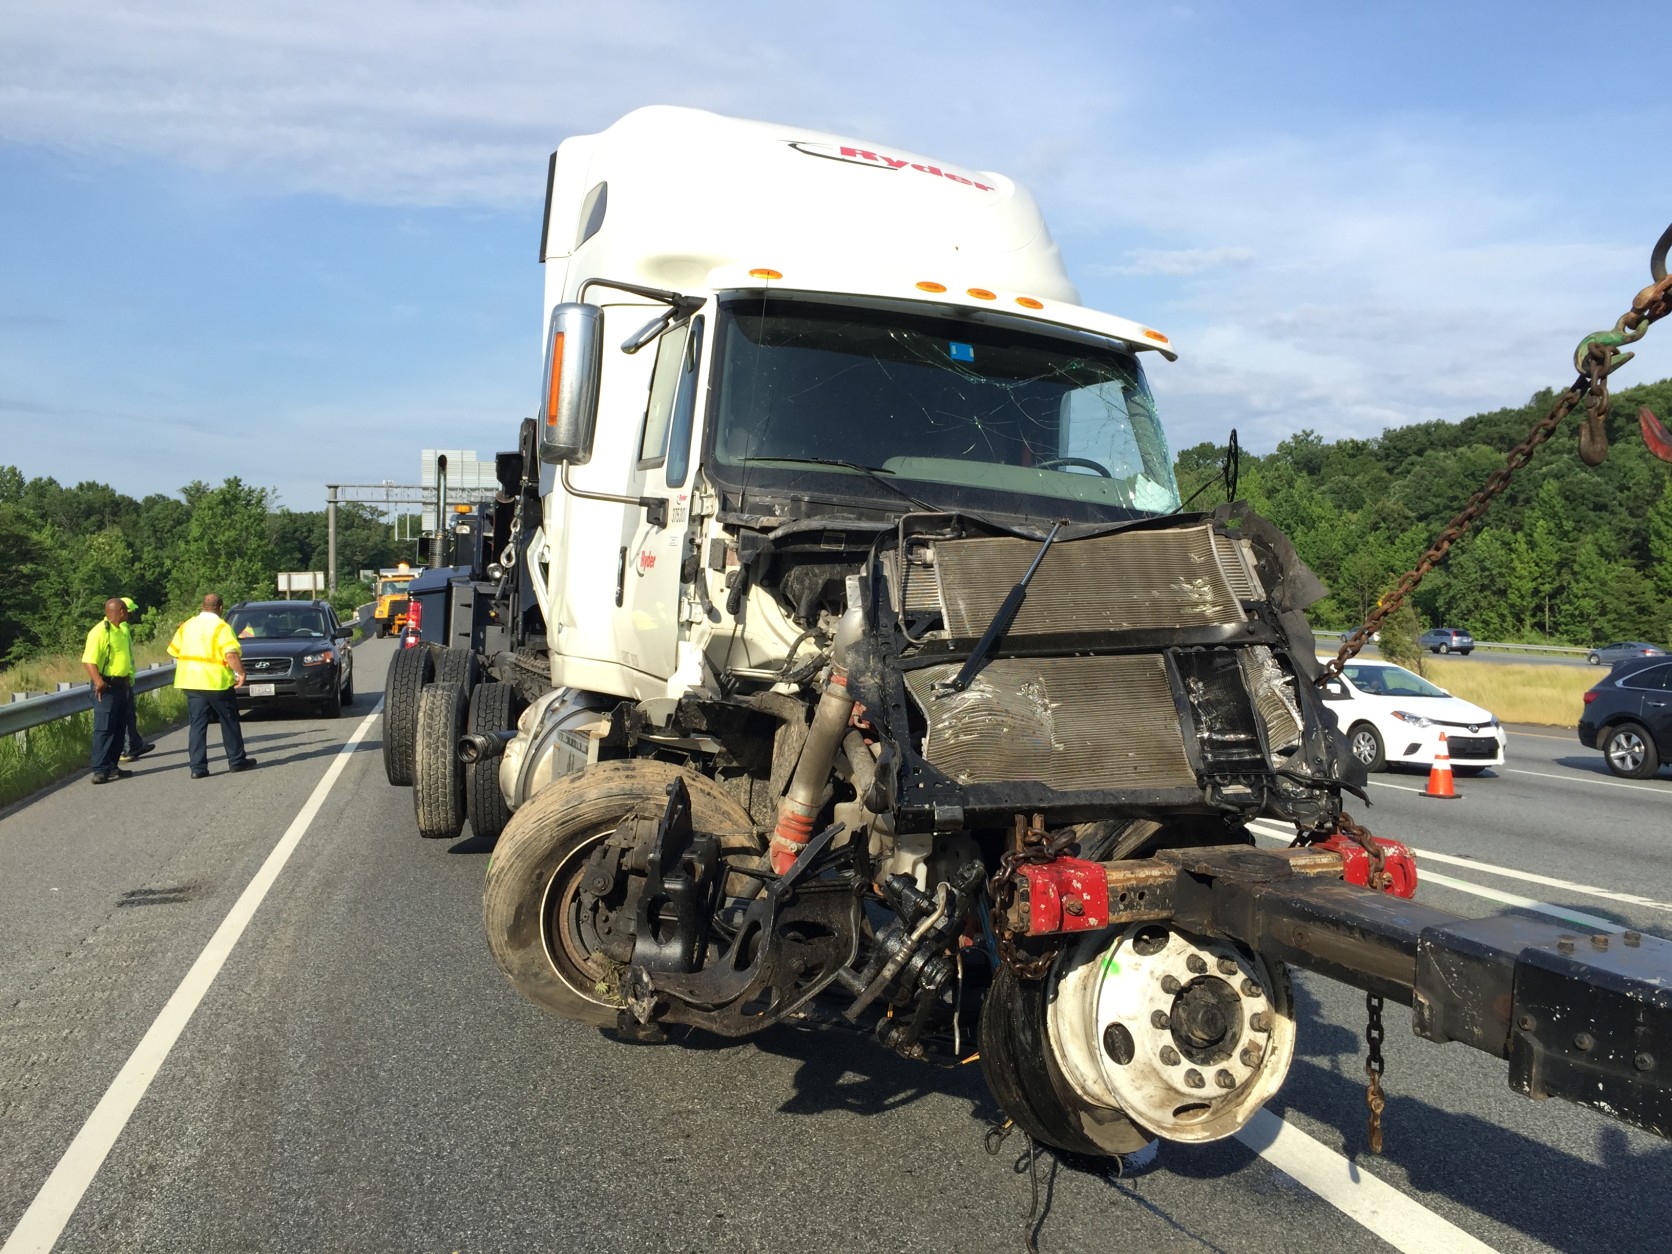 The cab involved in the fatal crash on I-95 in Beltsville is towed away. (WTOP/Kristi King)